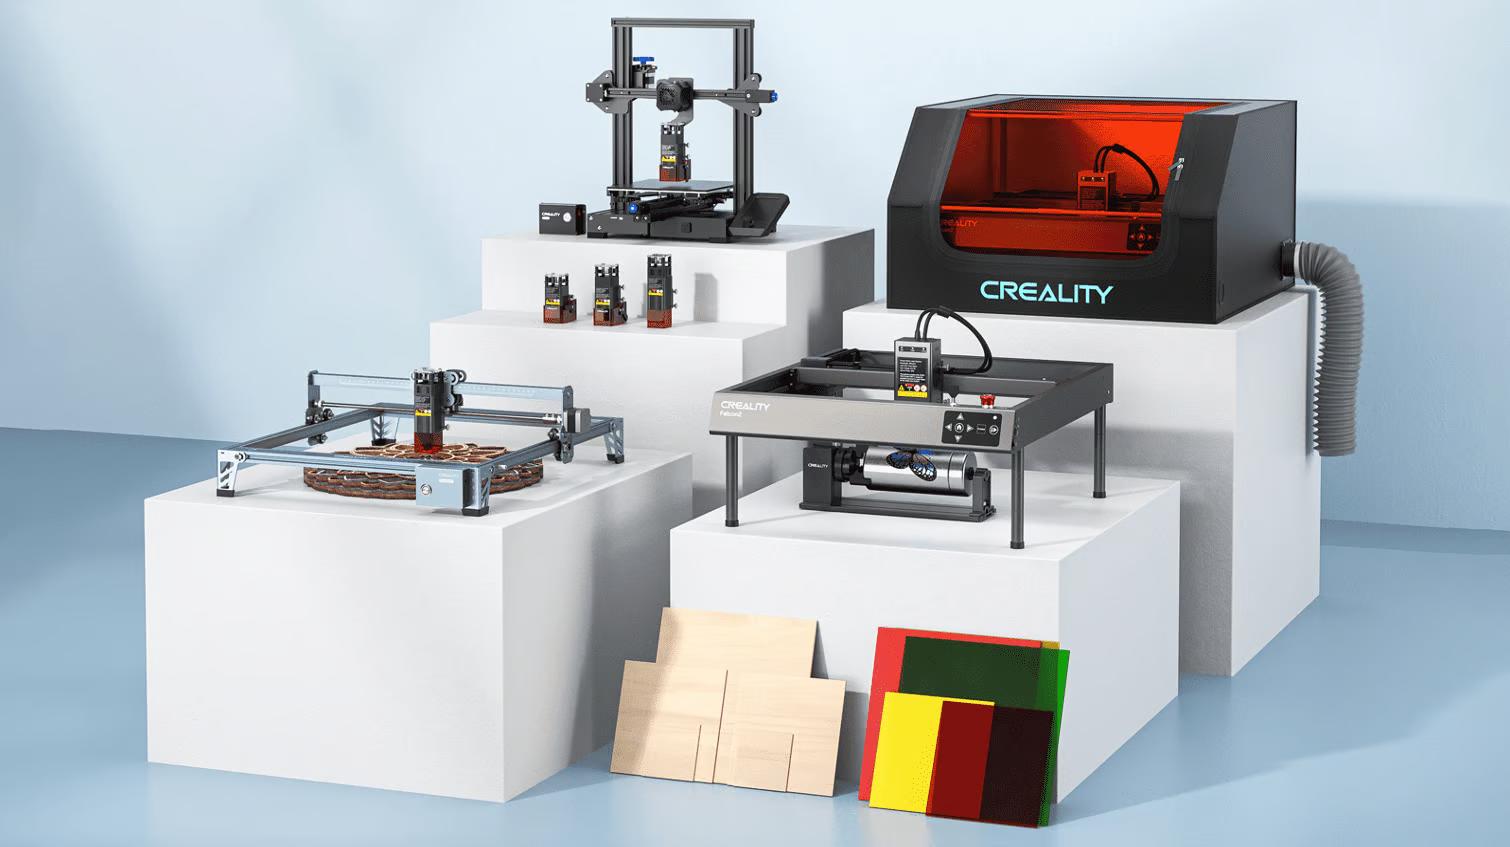 Creality Launches the Falcon2, Its Most Powerful Laser Engraver Yet